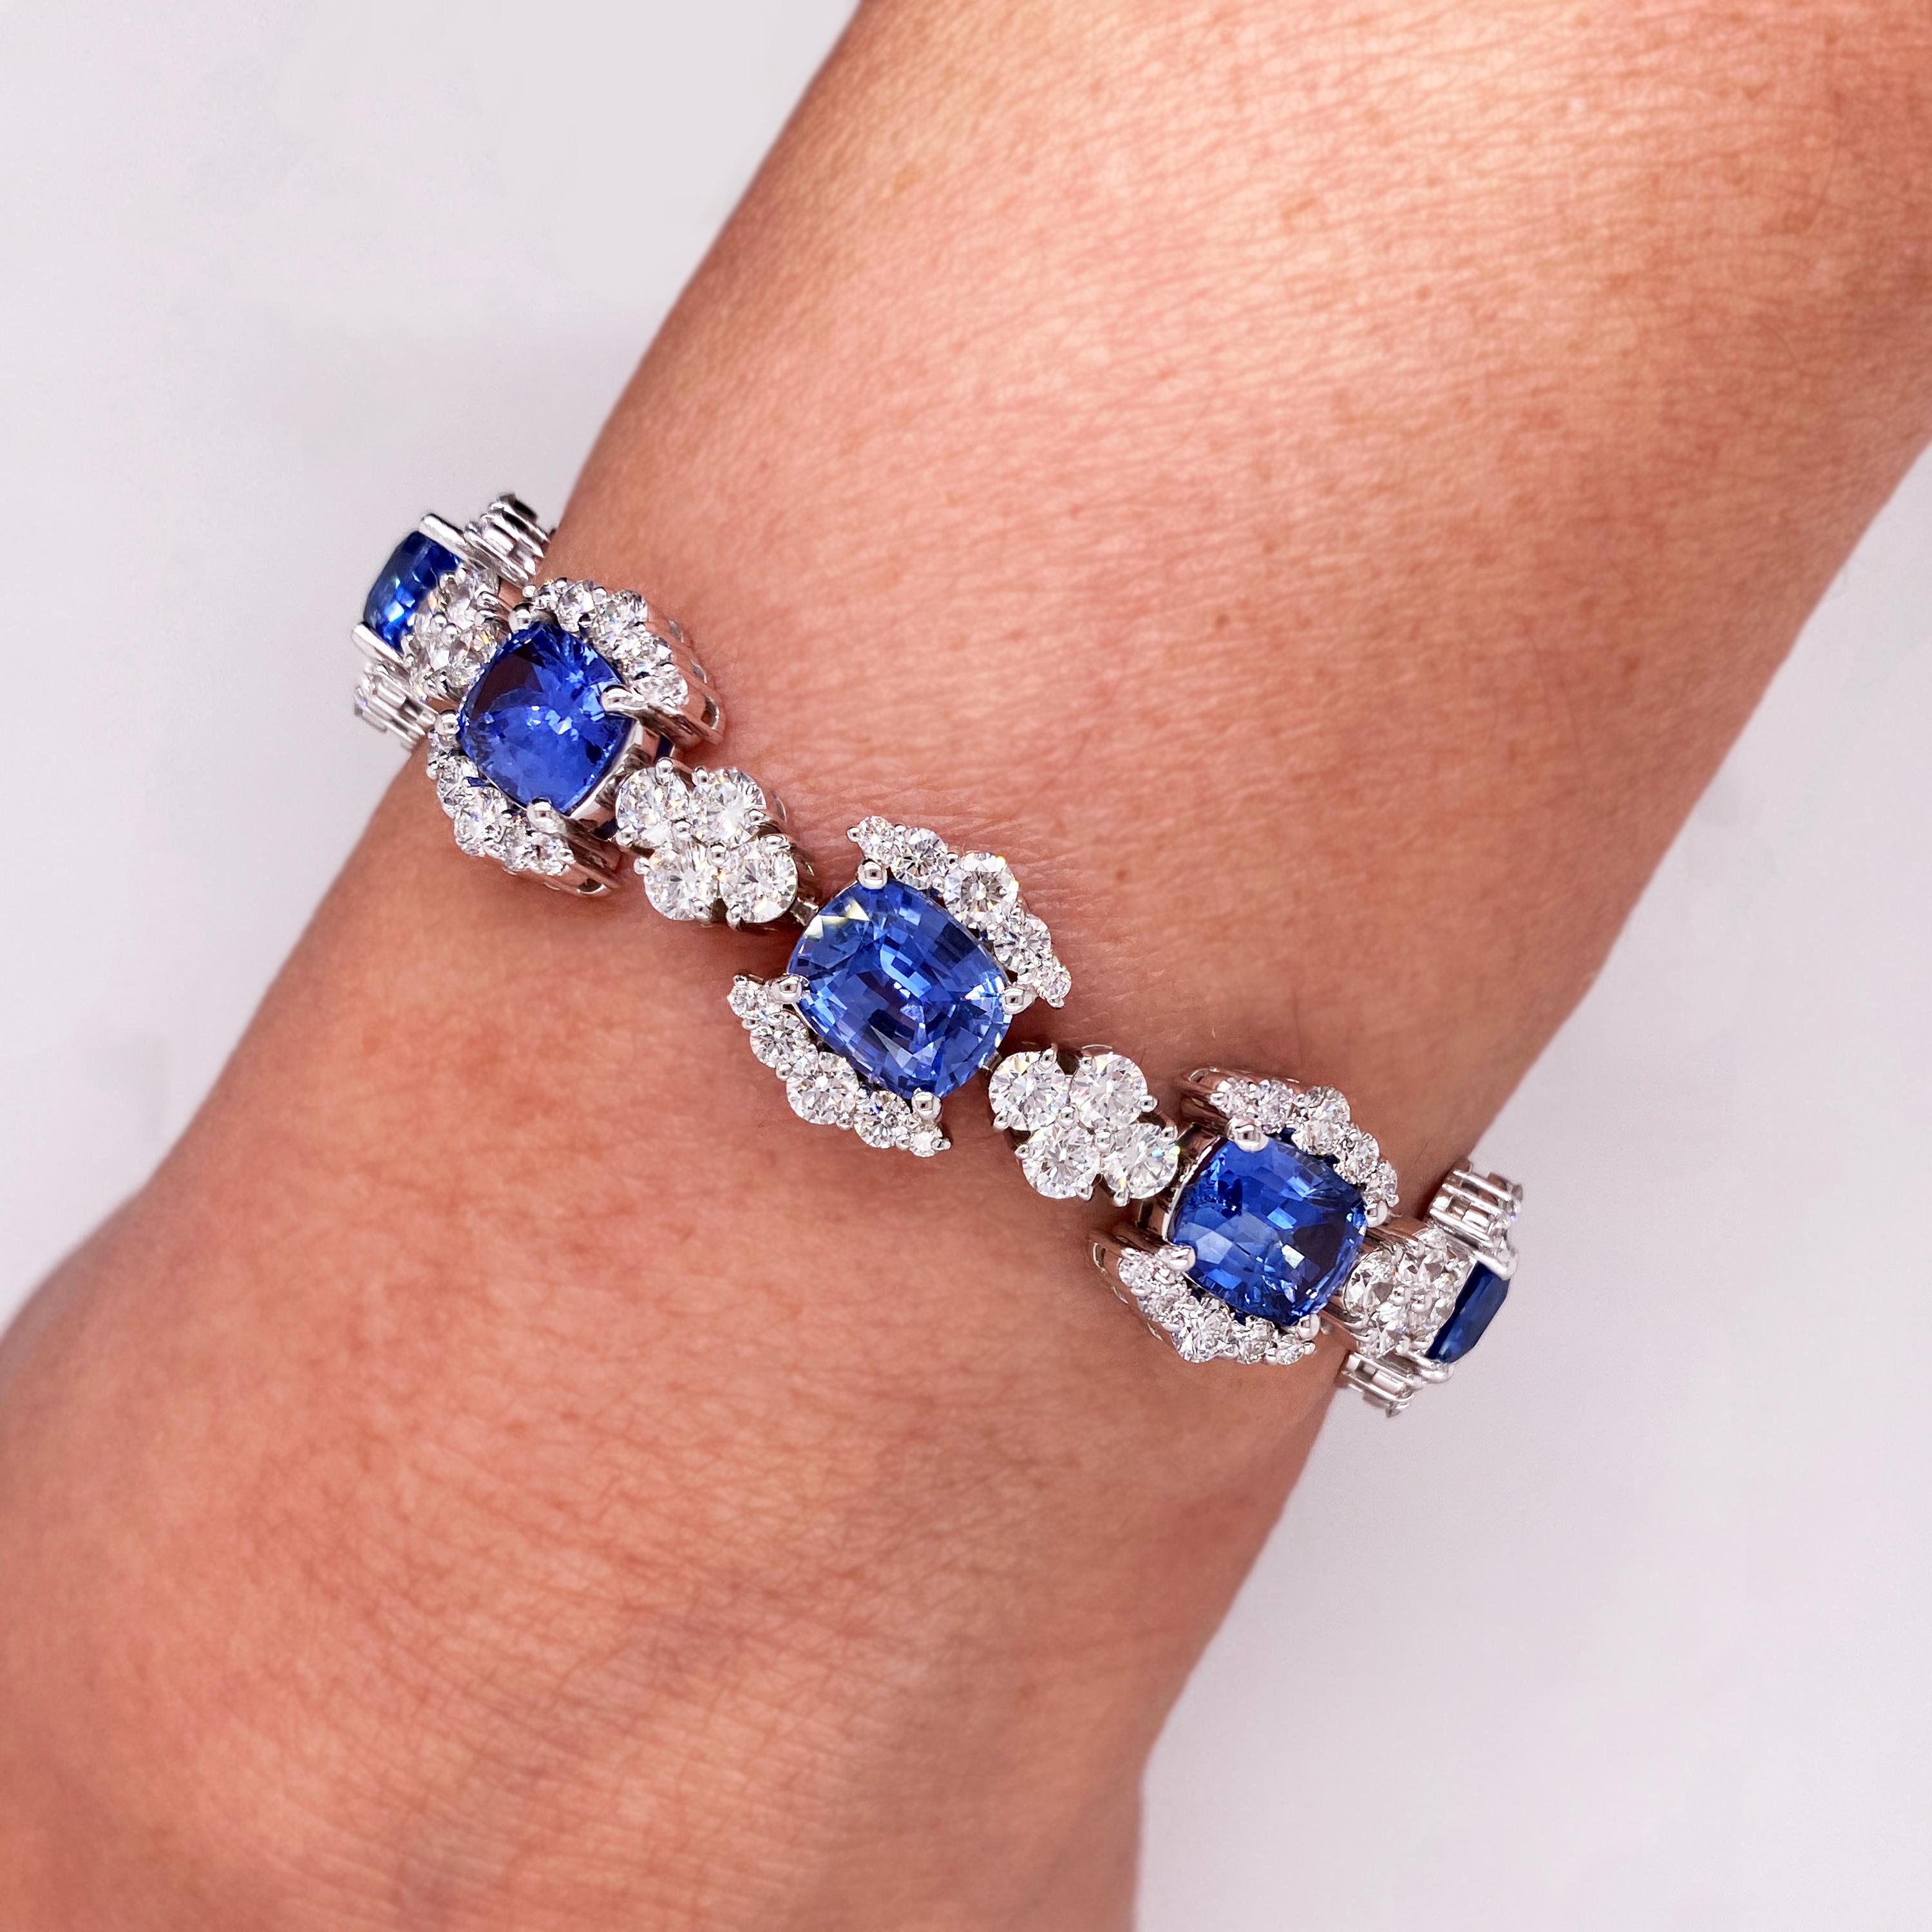 Stambolian GIA Cert Ceylon 21.79 Carat Blue Sapphires Diamonds 18K Gold Bracelet

This one-of-a-kind bracelet by Stambolian features ten (10) natural Ceylon (Sri Lanka) sapphires that are certified by GIA (view certificate in photos). The sapphires